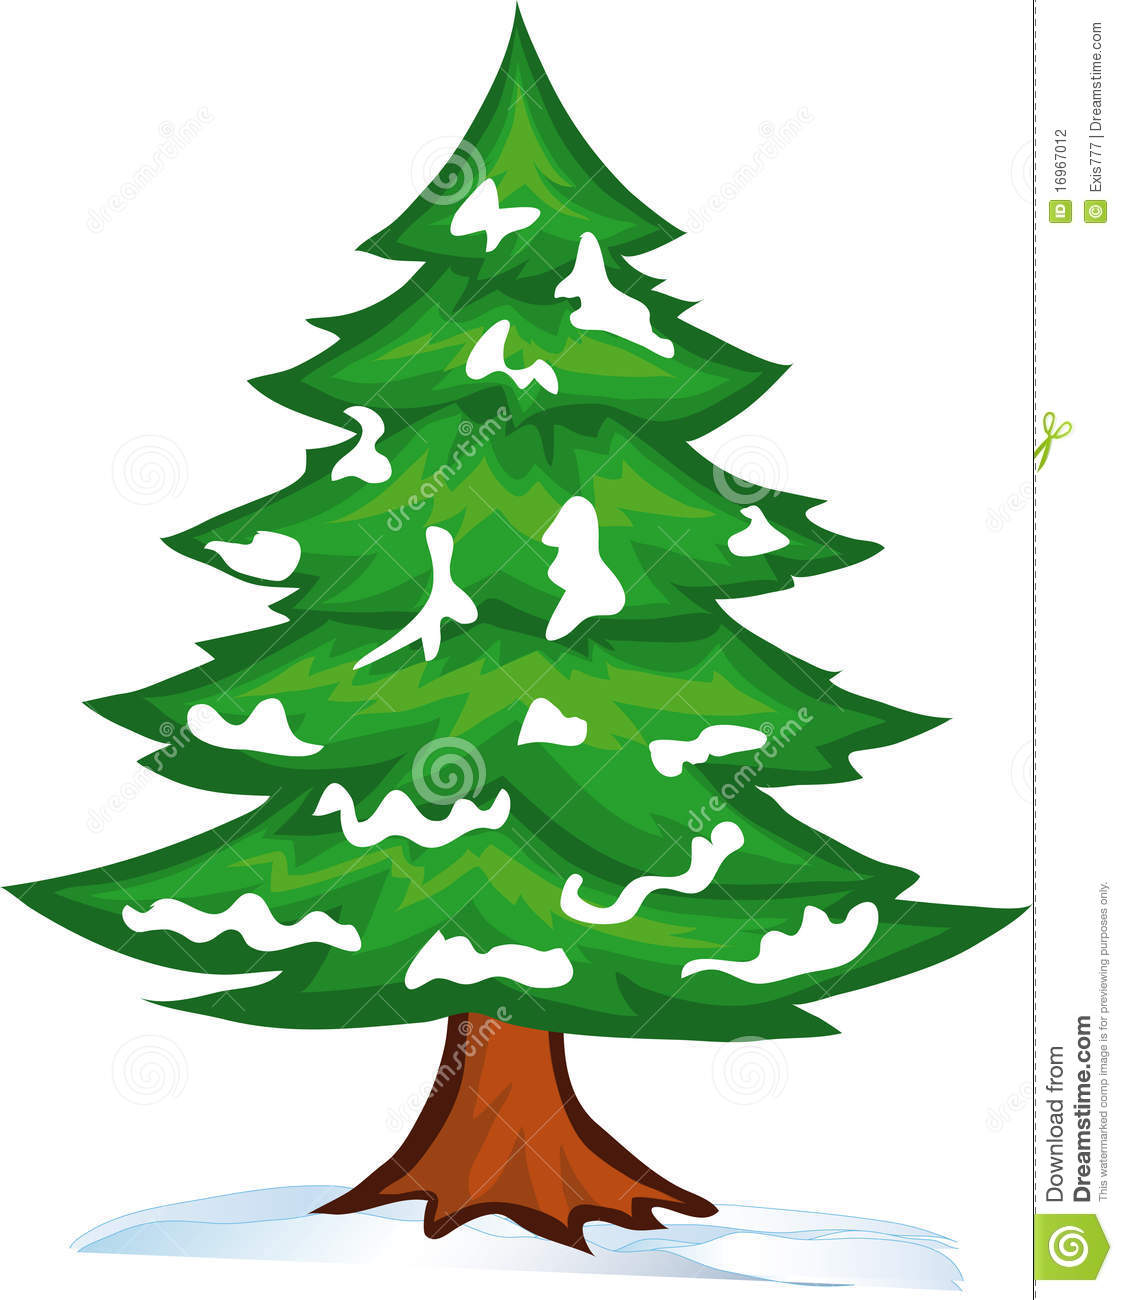 Winter Pine Trees Clipart   Clipart Panda   Free Clipart Images